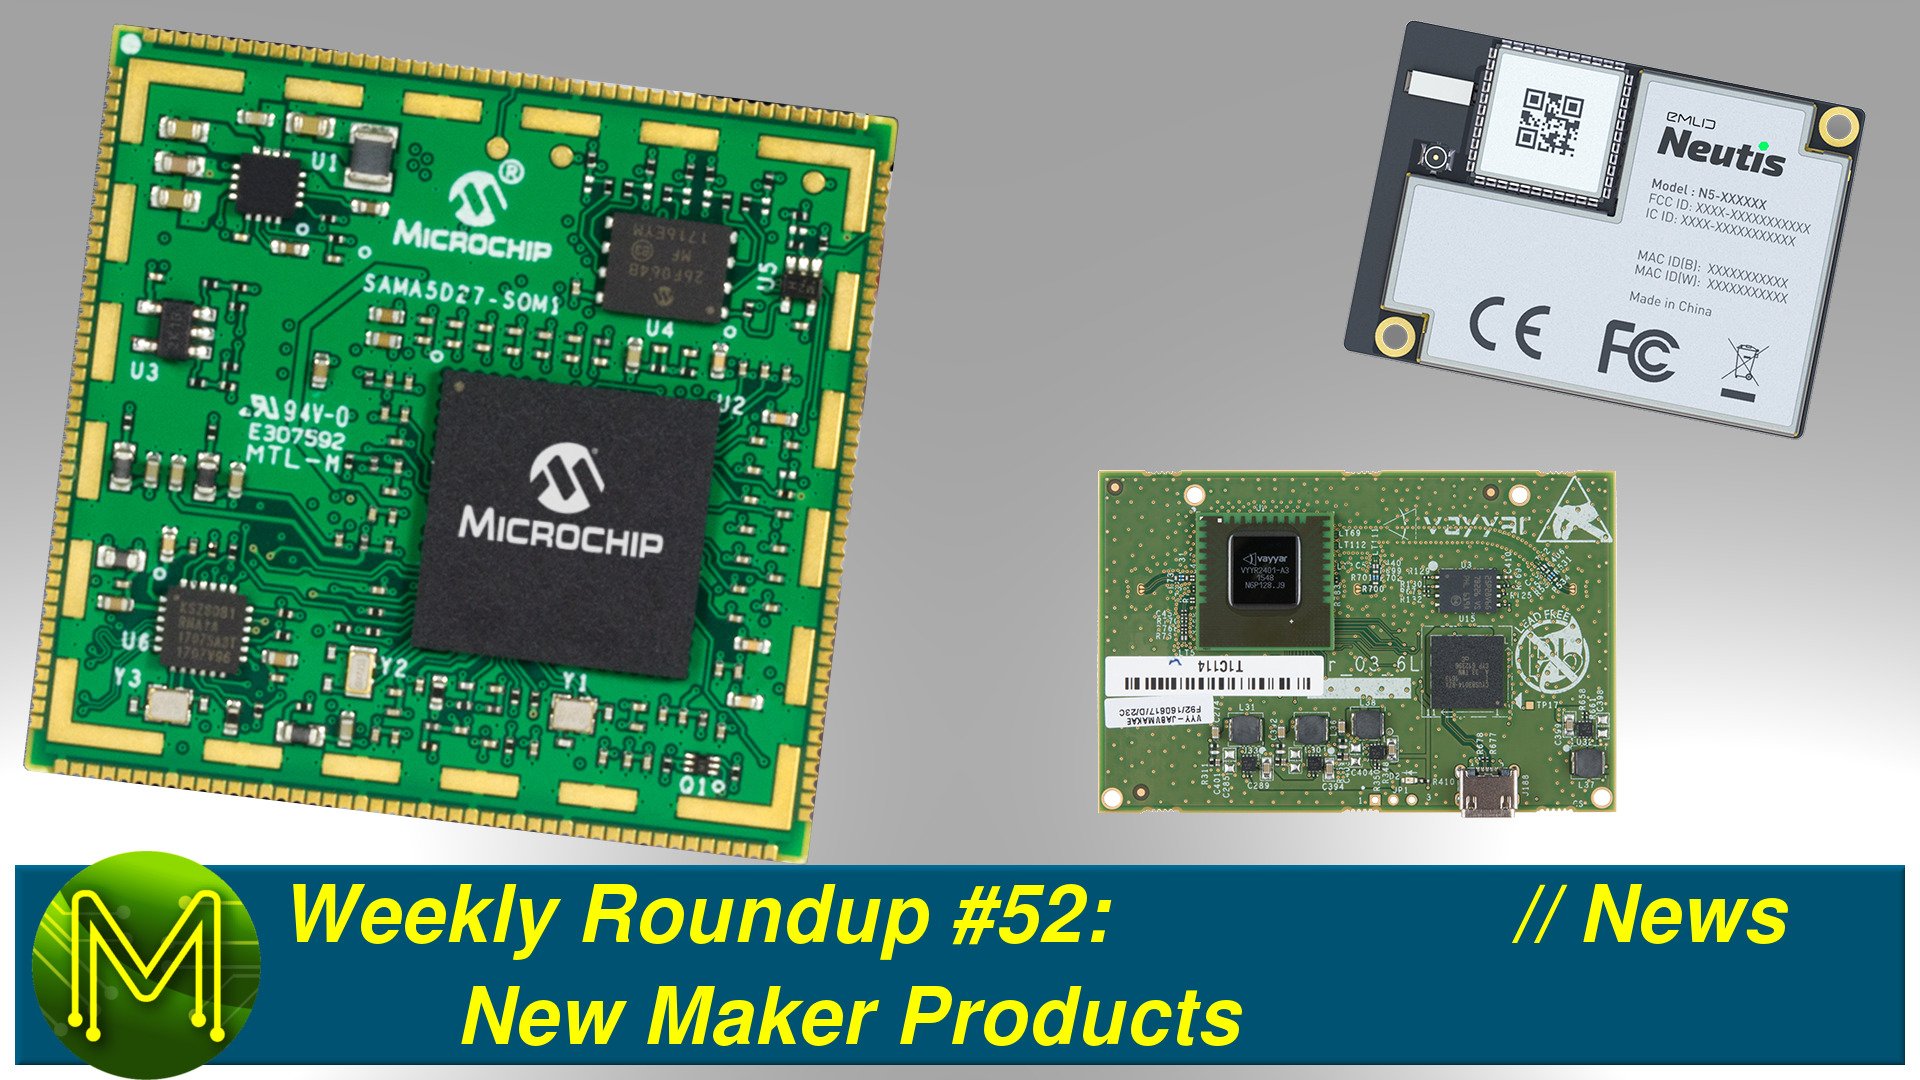 Weekly Roundup #52 - New Maker Products // News